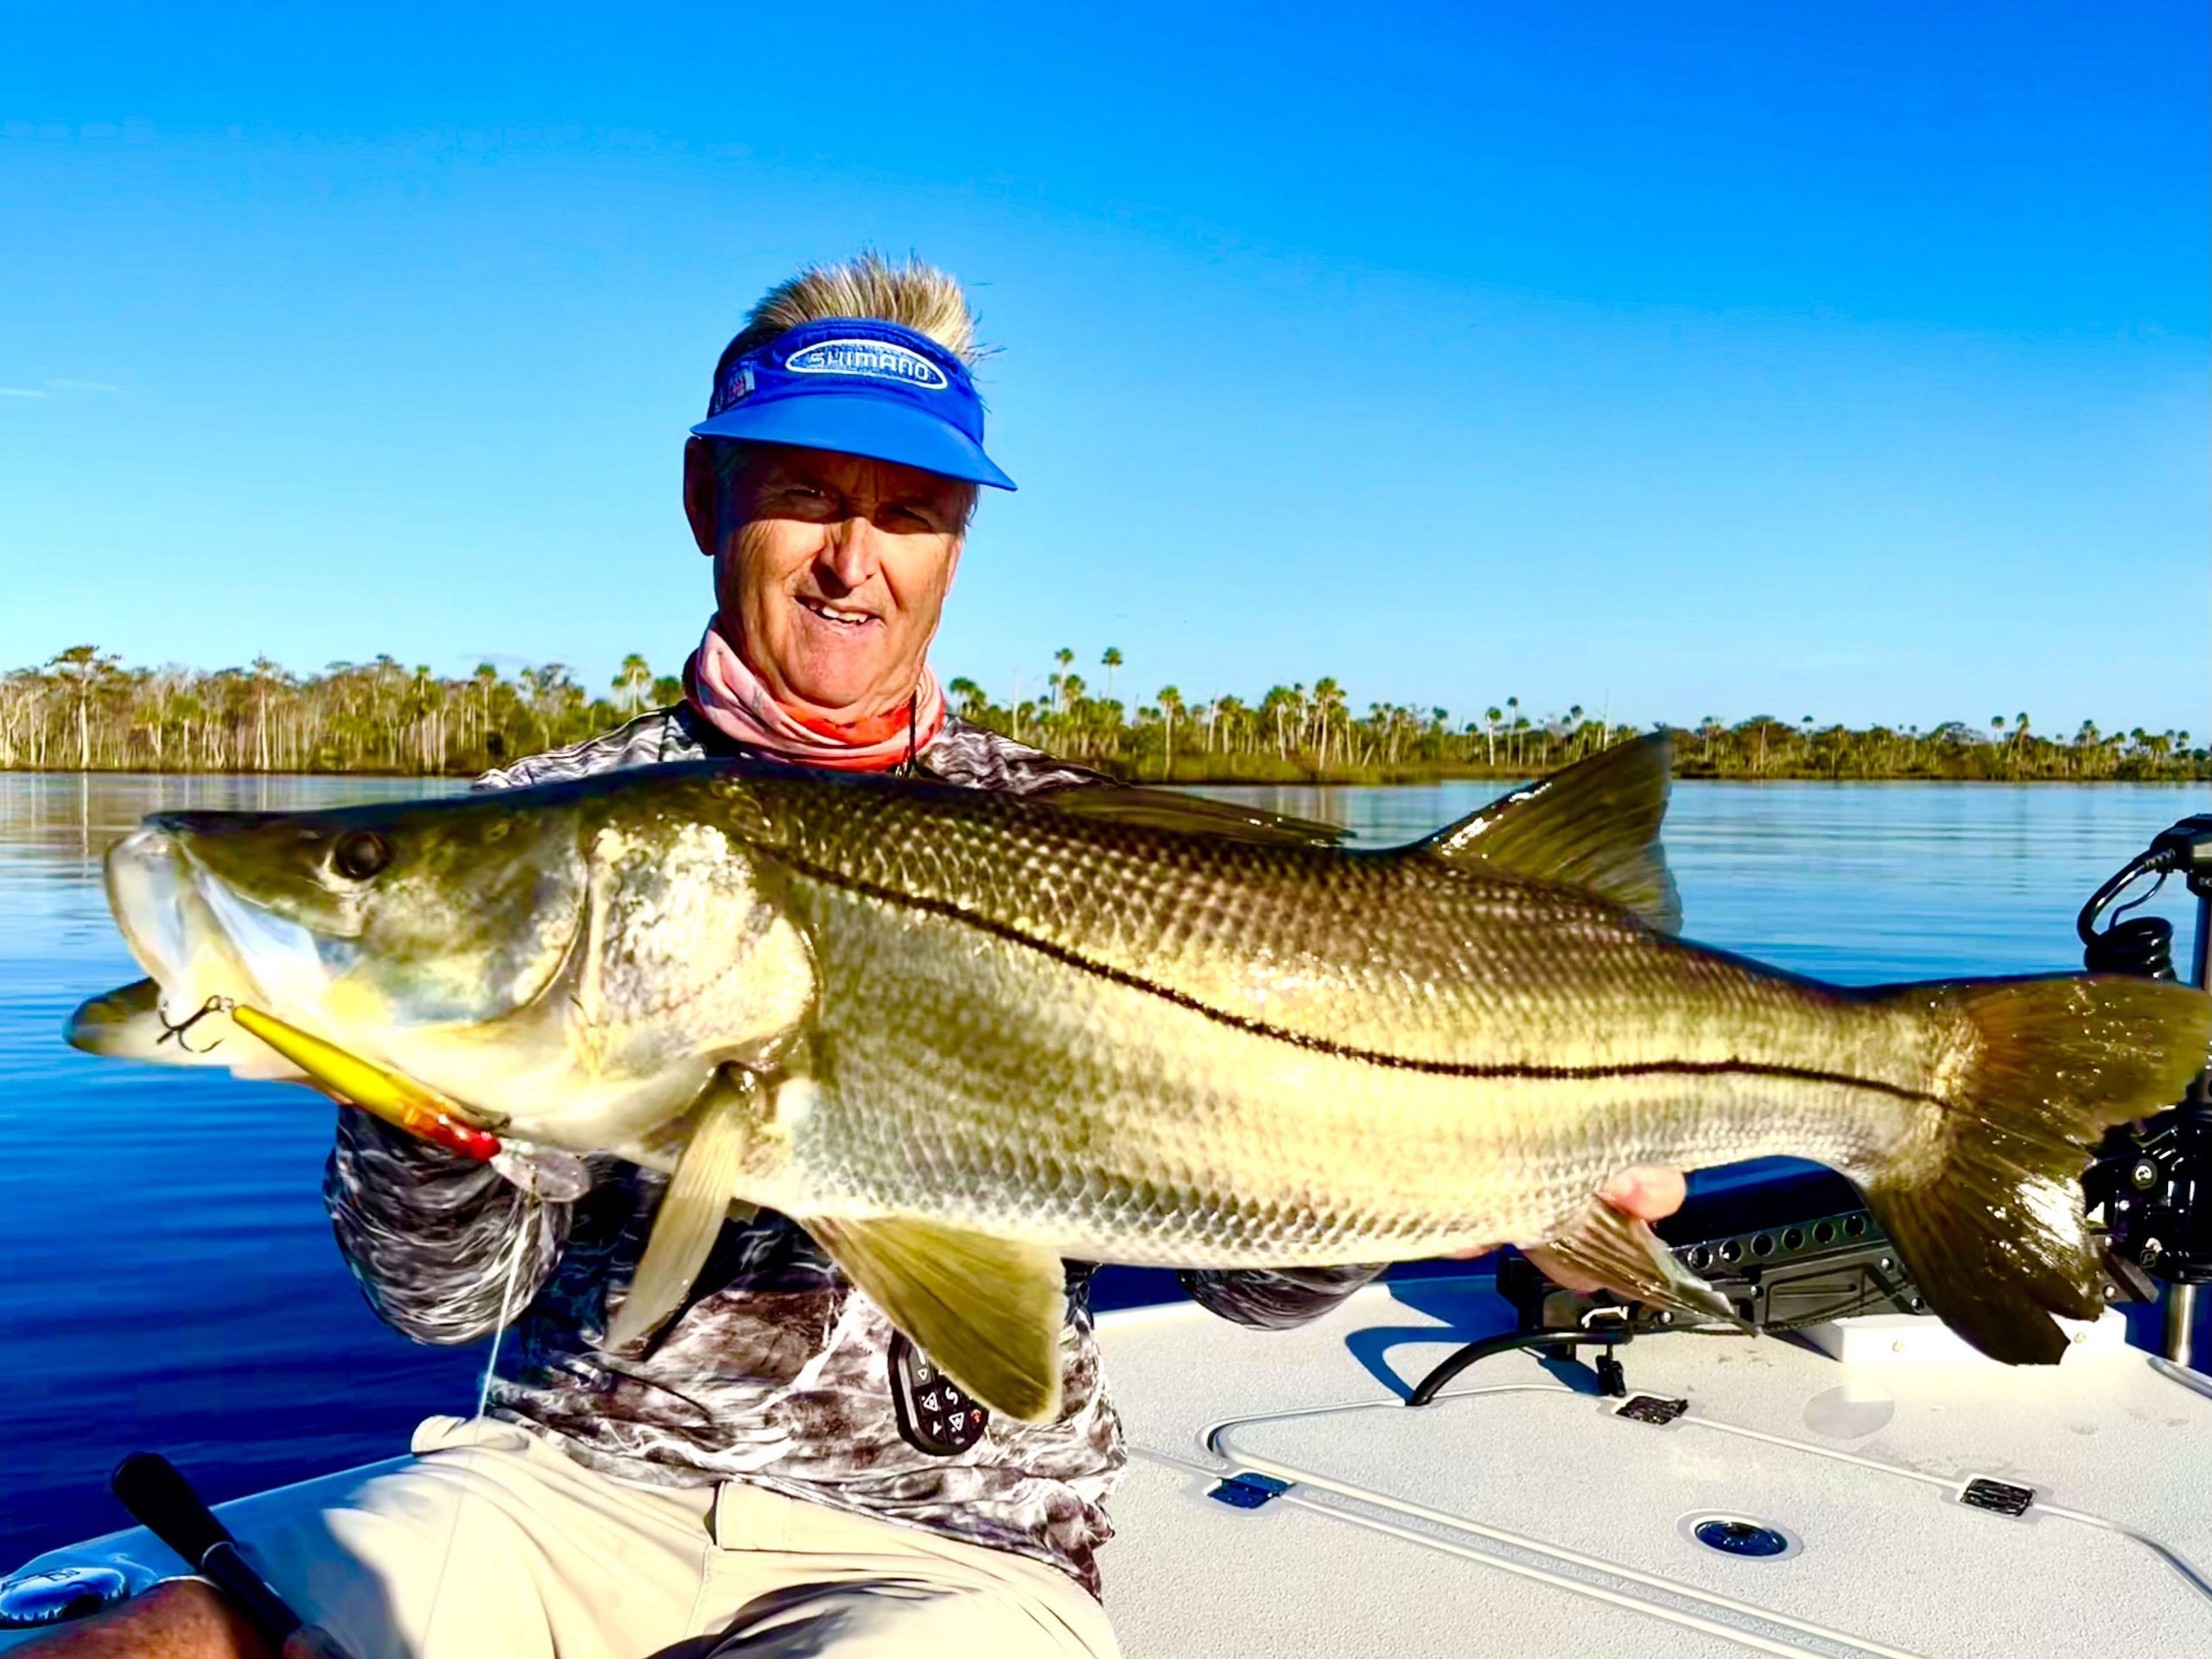 Bernie Schultz landed a sizable fish during the offseason as well. 